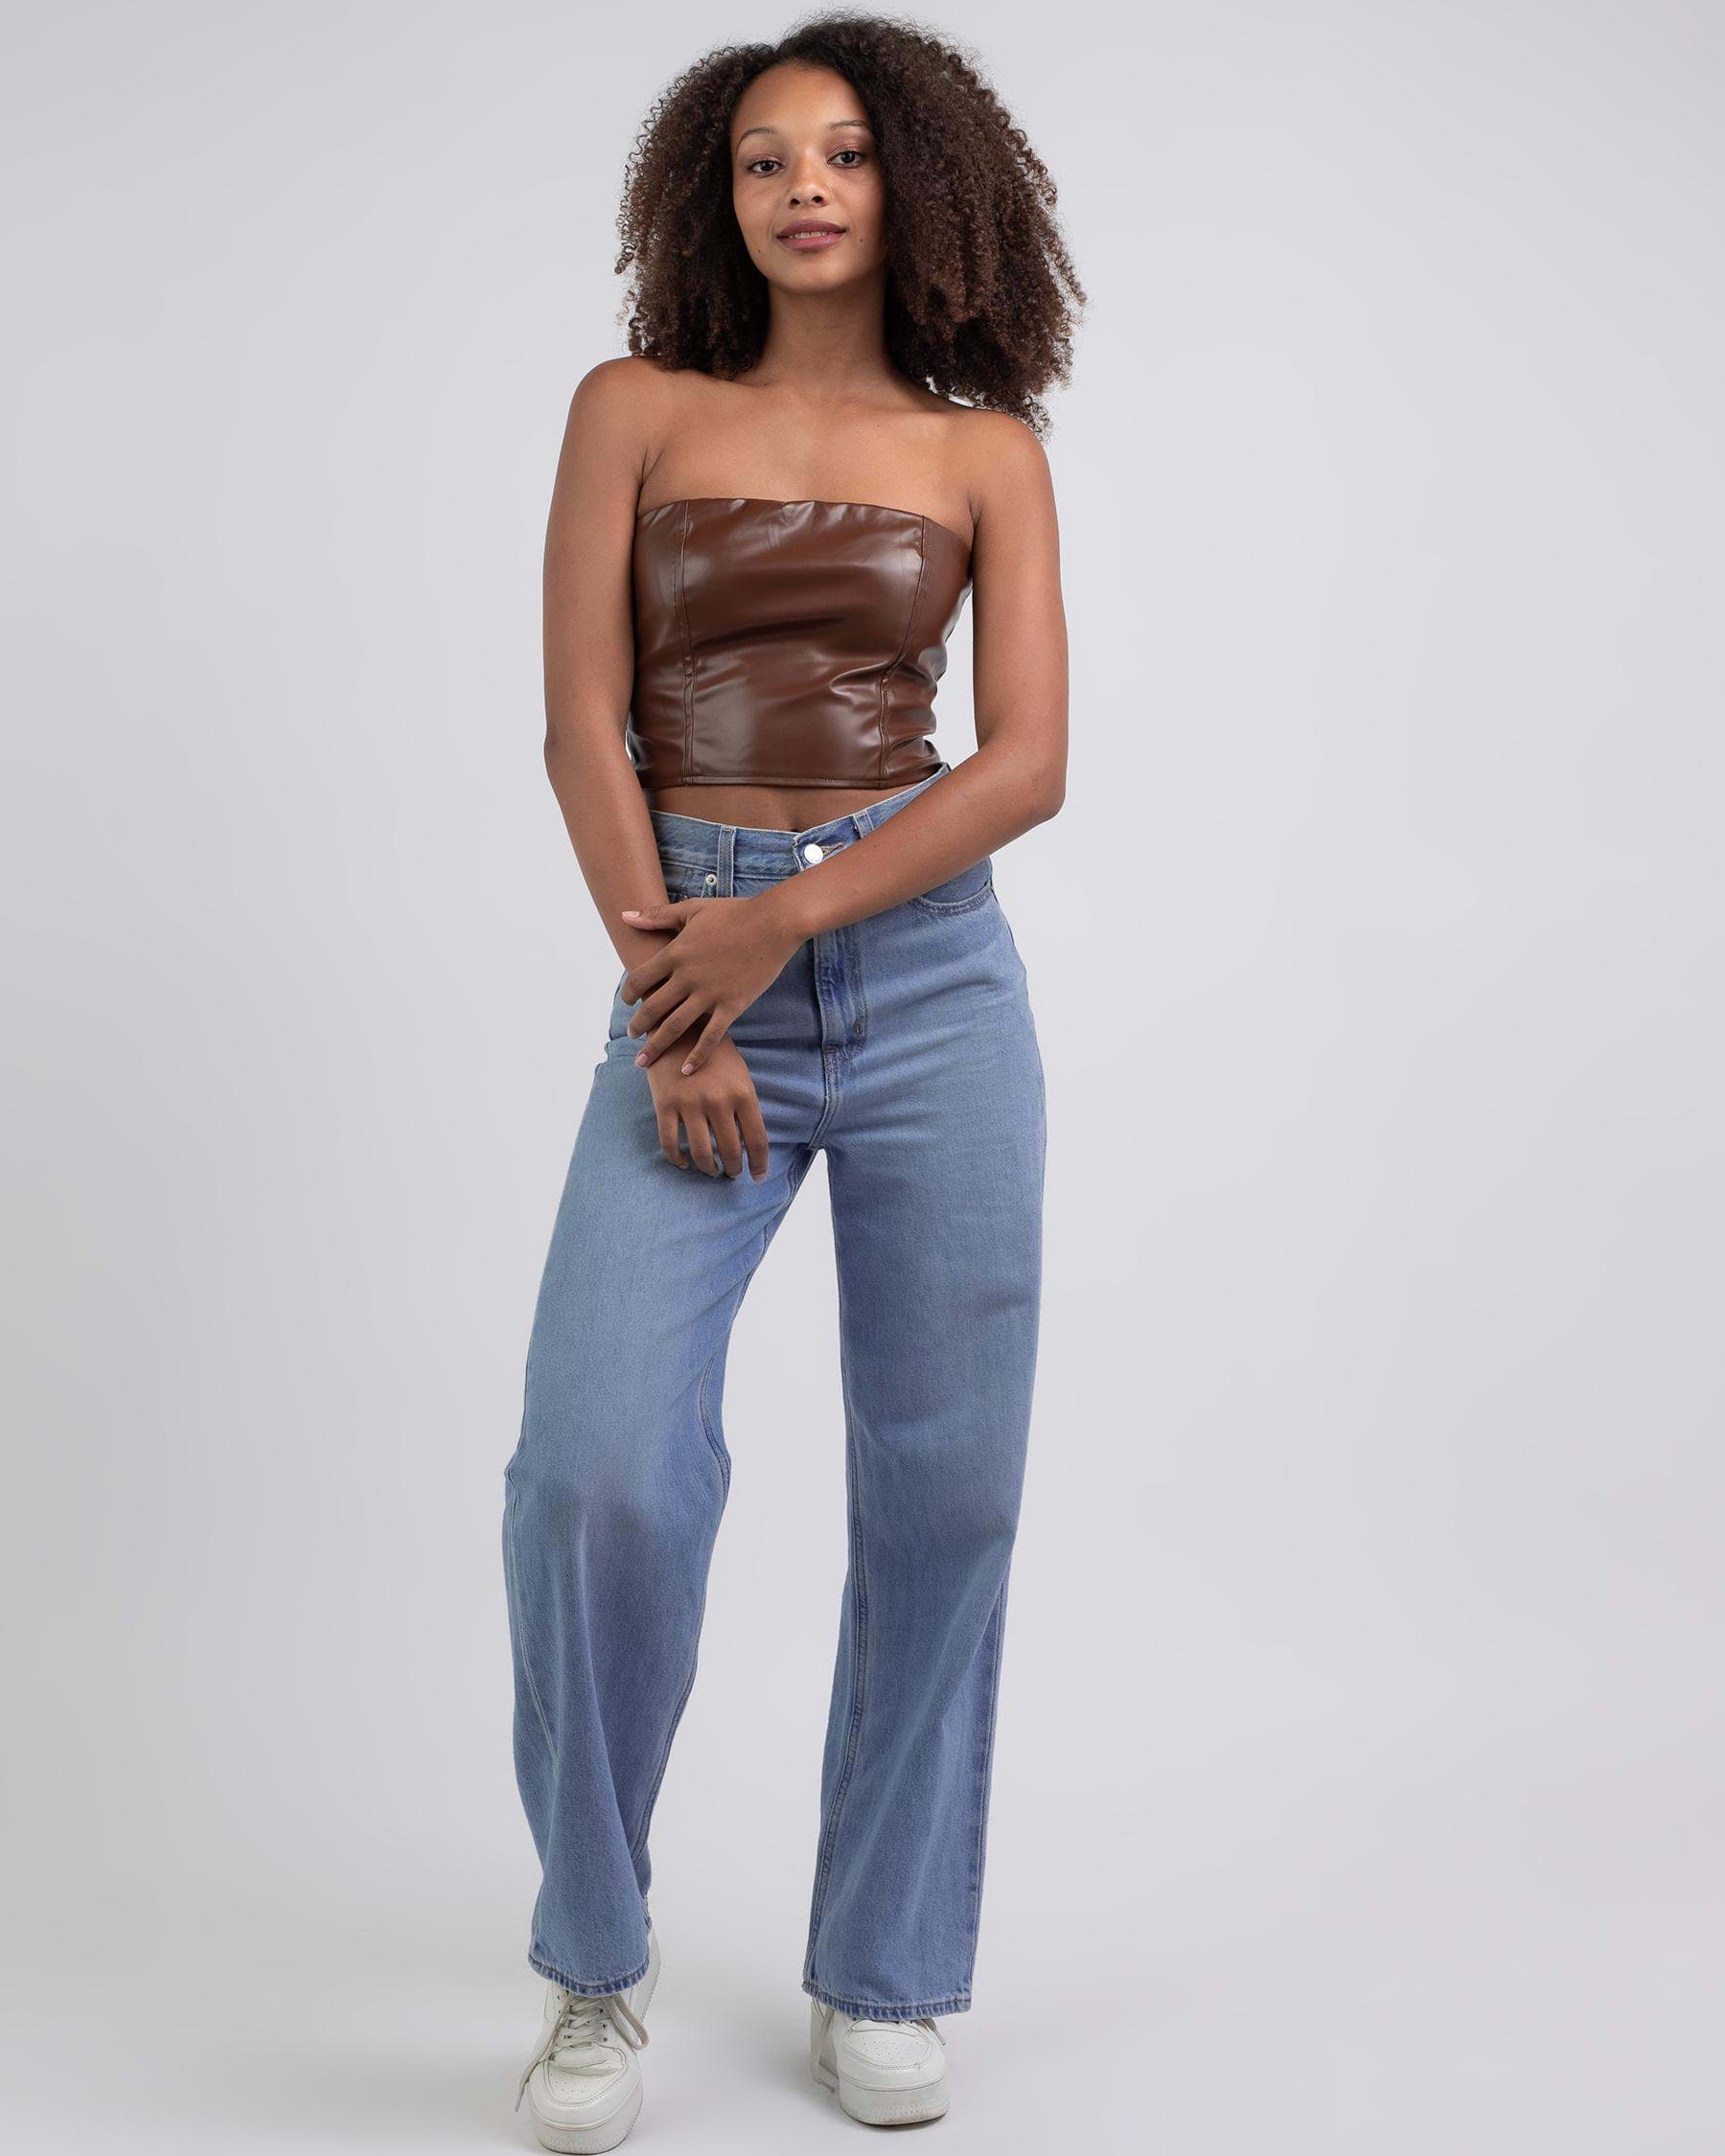 Shop Luvalot Fox Vegan Leather Tube Top In Brown - Fast Shipping & Easy ...